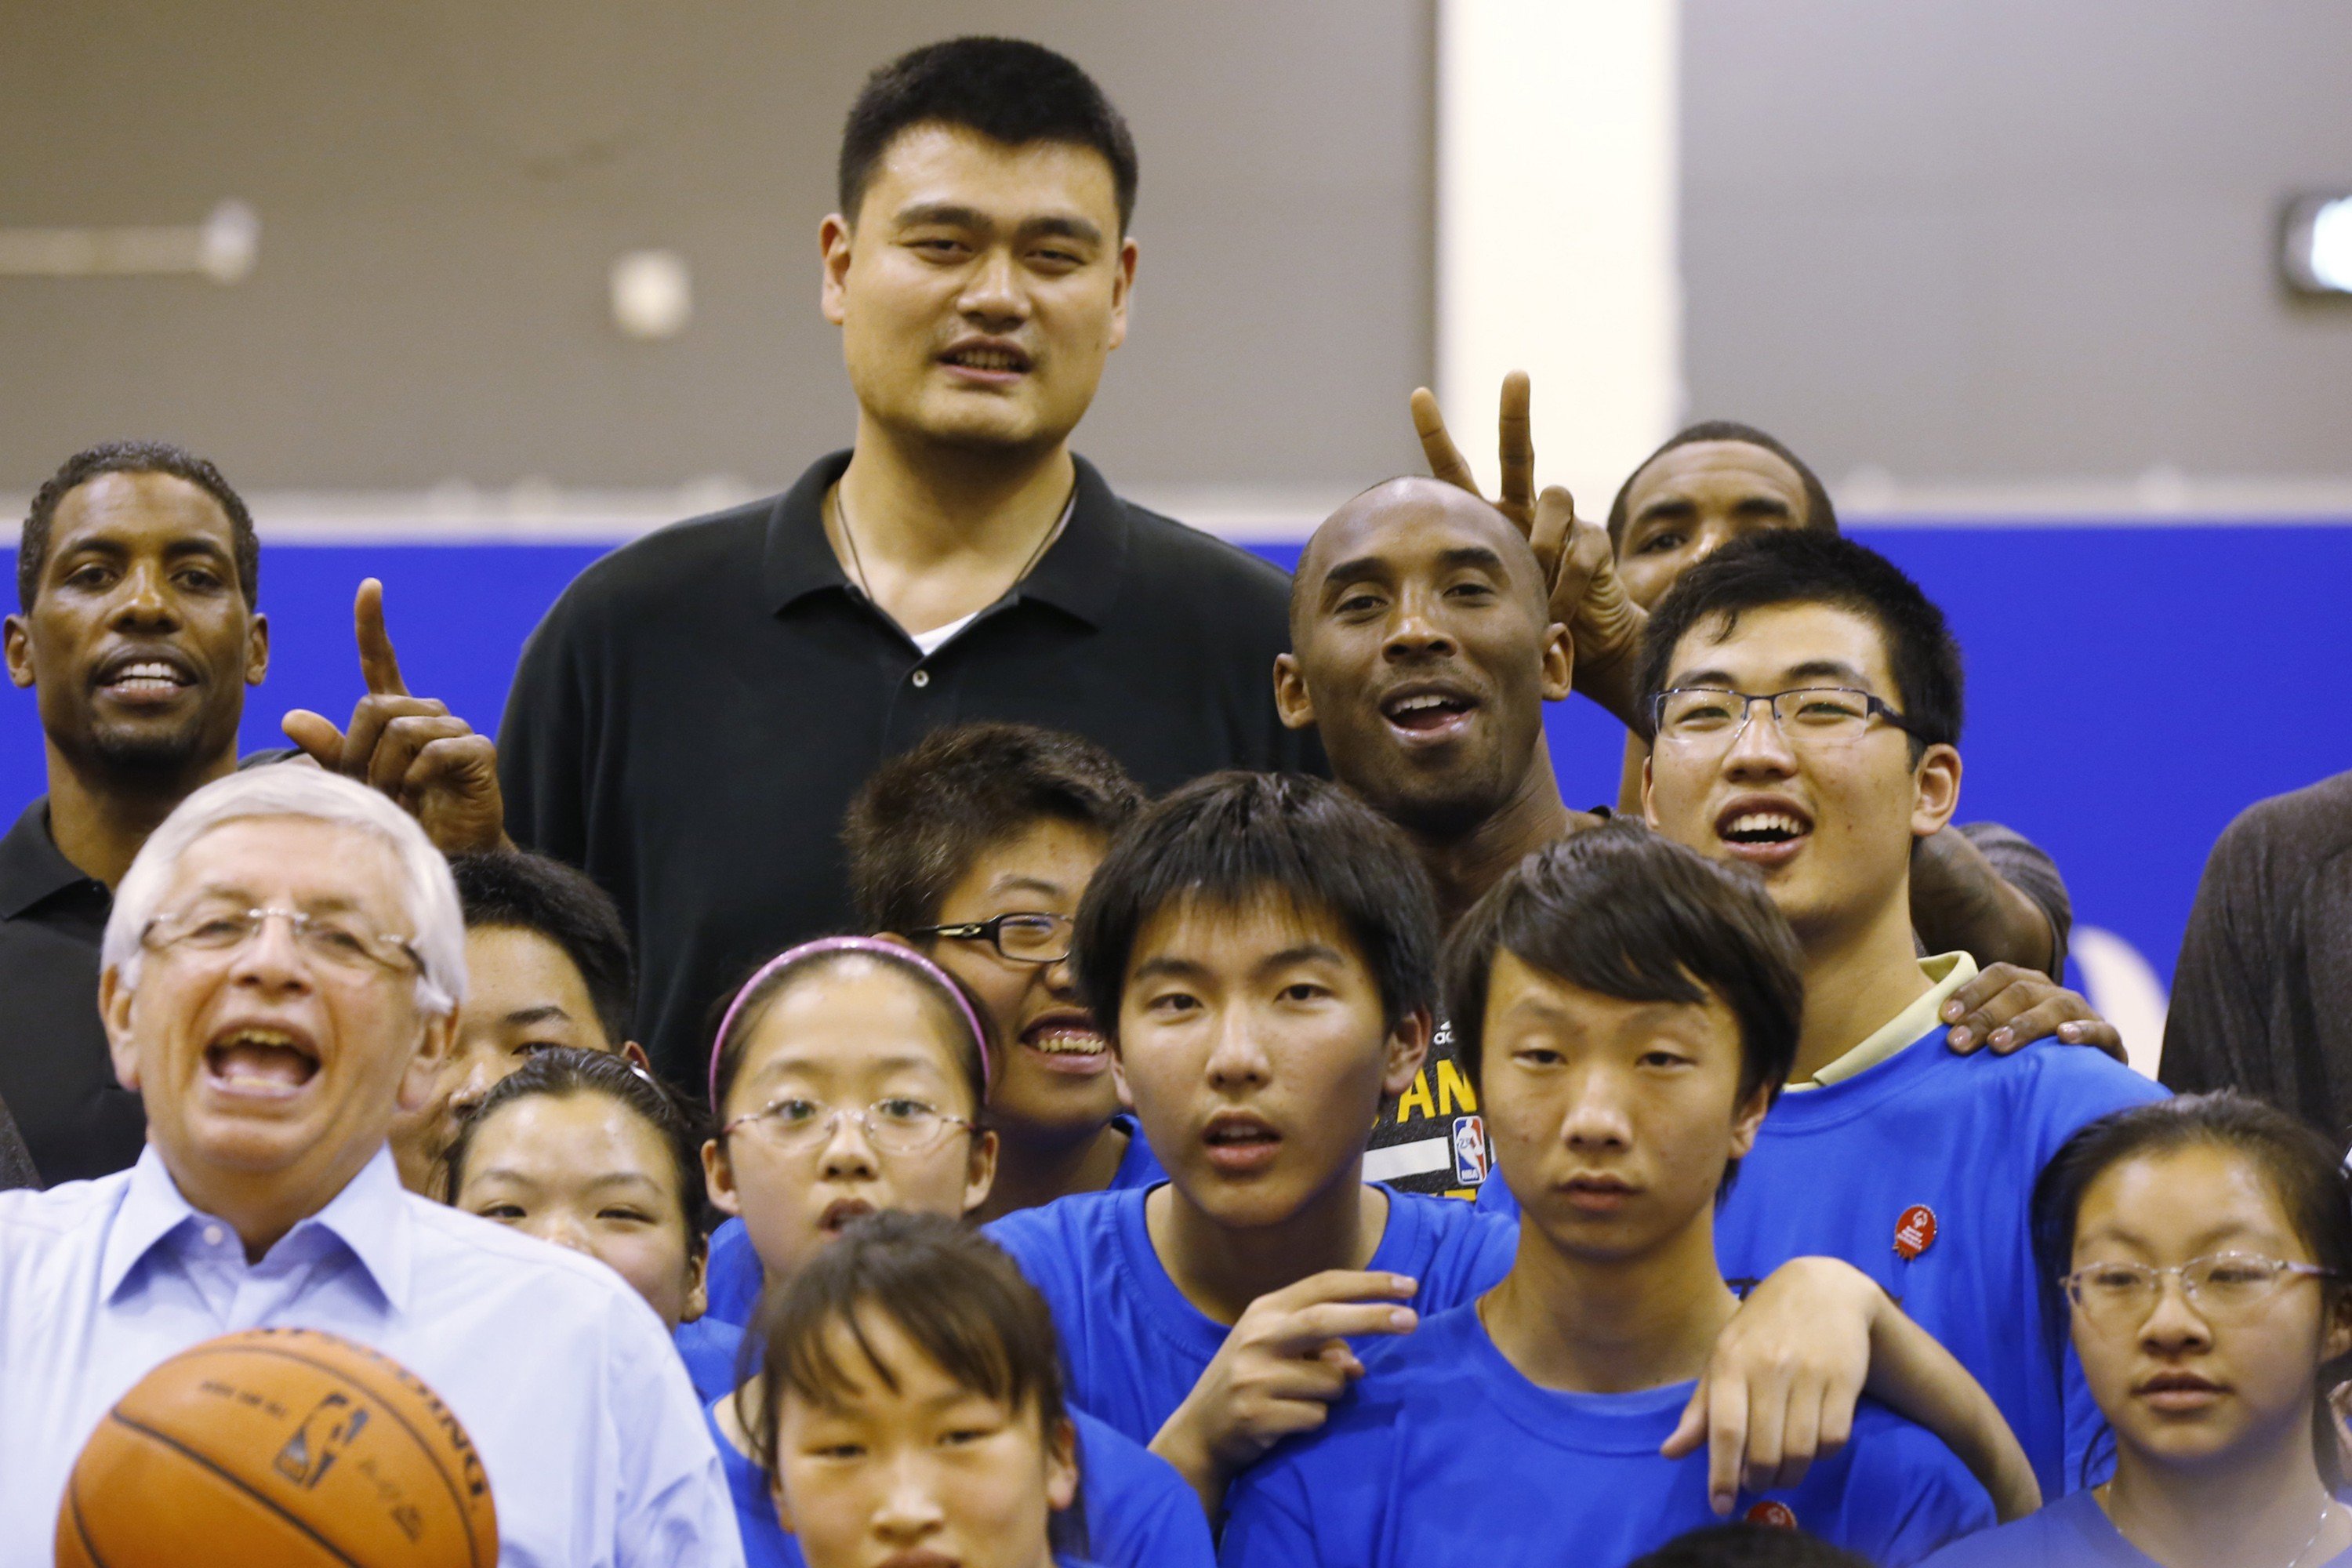 Kobe Bryant, Yao Ming and NBA commissioner David Stern pose with children during the NBA Cares Special Olympics Basketball Clinic in Shanghai in 2013. Photo: AP